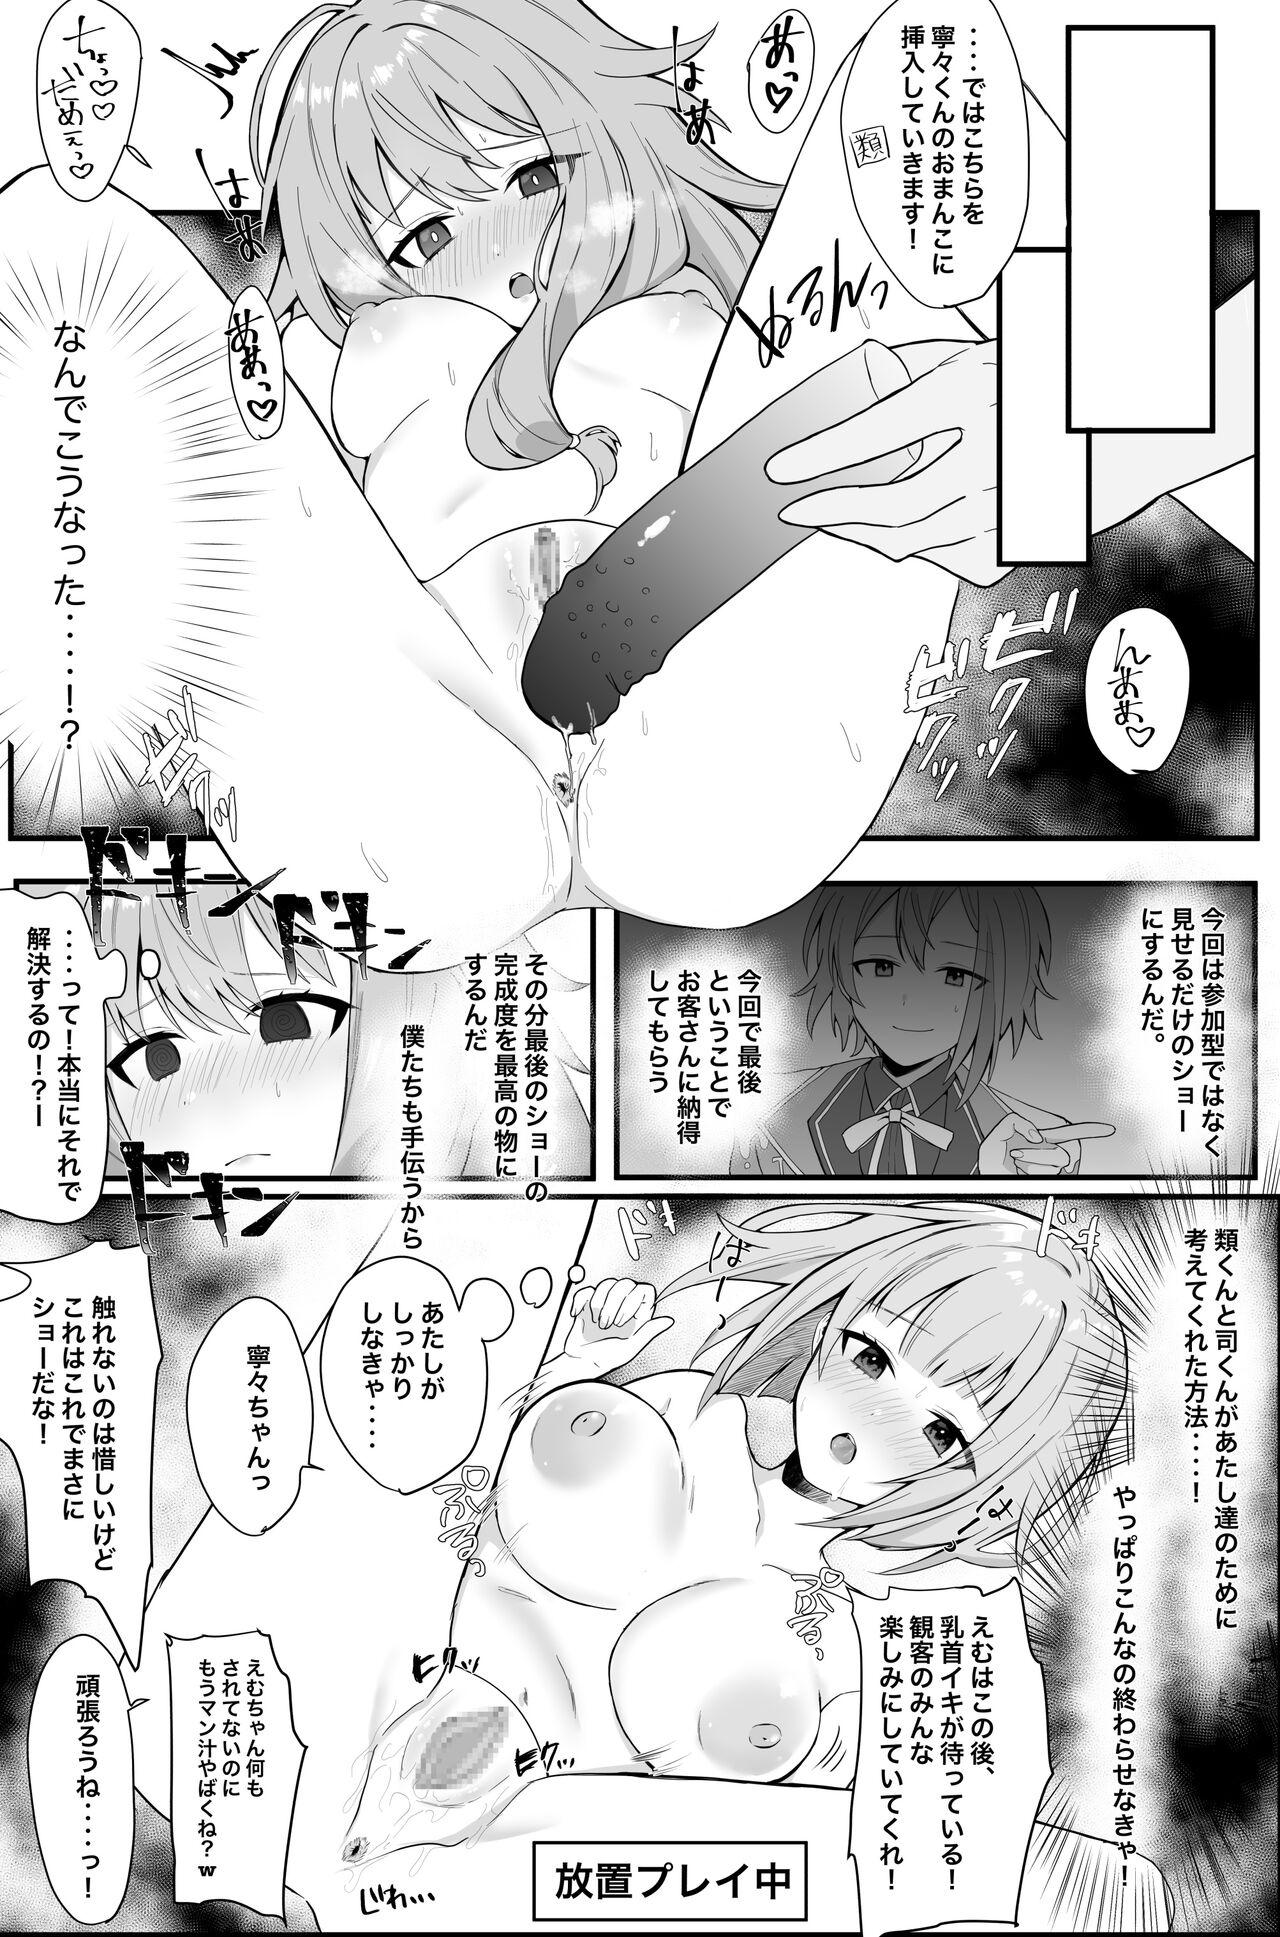 Hot えむねねちゃん決着編! - Project sekai Ass Fuck - Page 3